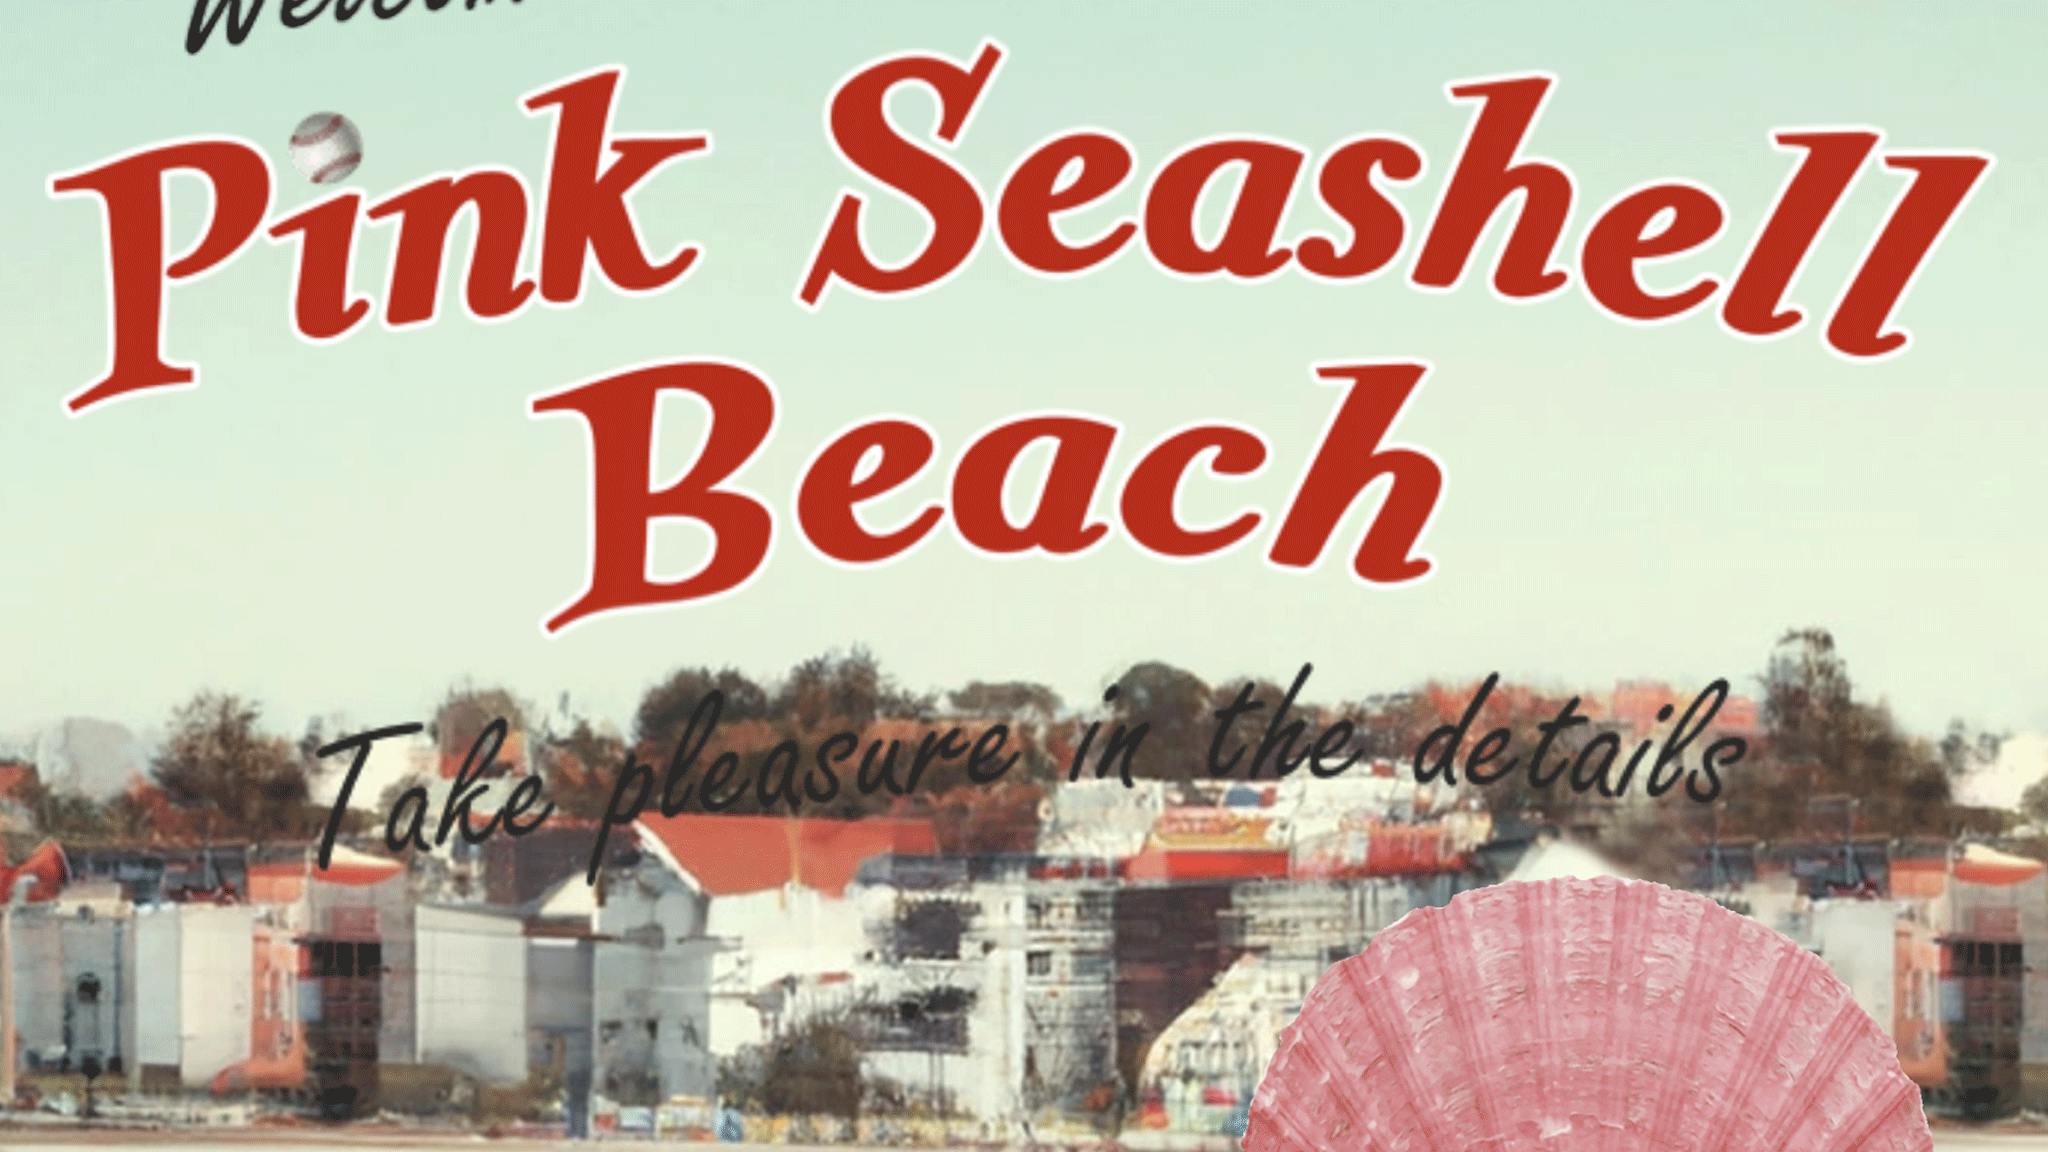 Fall Out Boy are sending fans postcards from ‘Pink Seashell Beach’